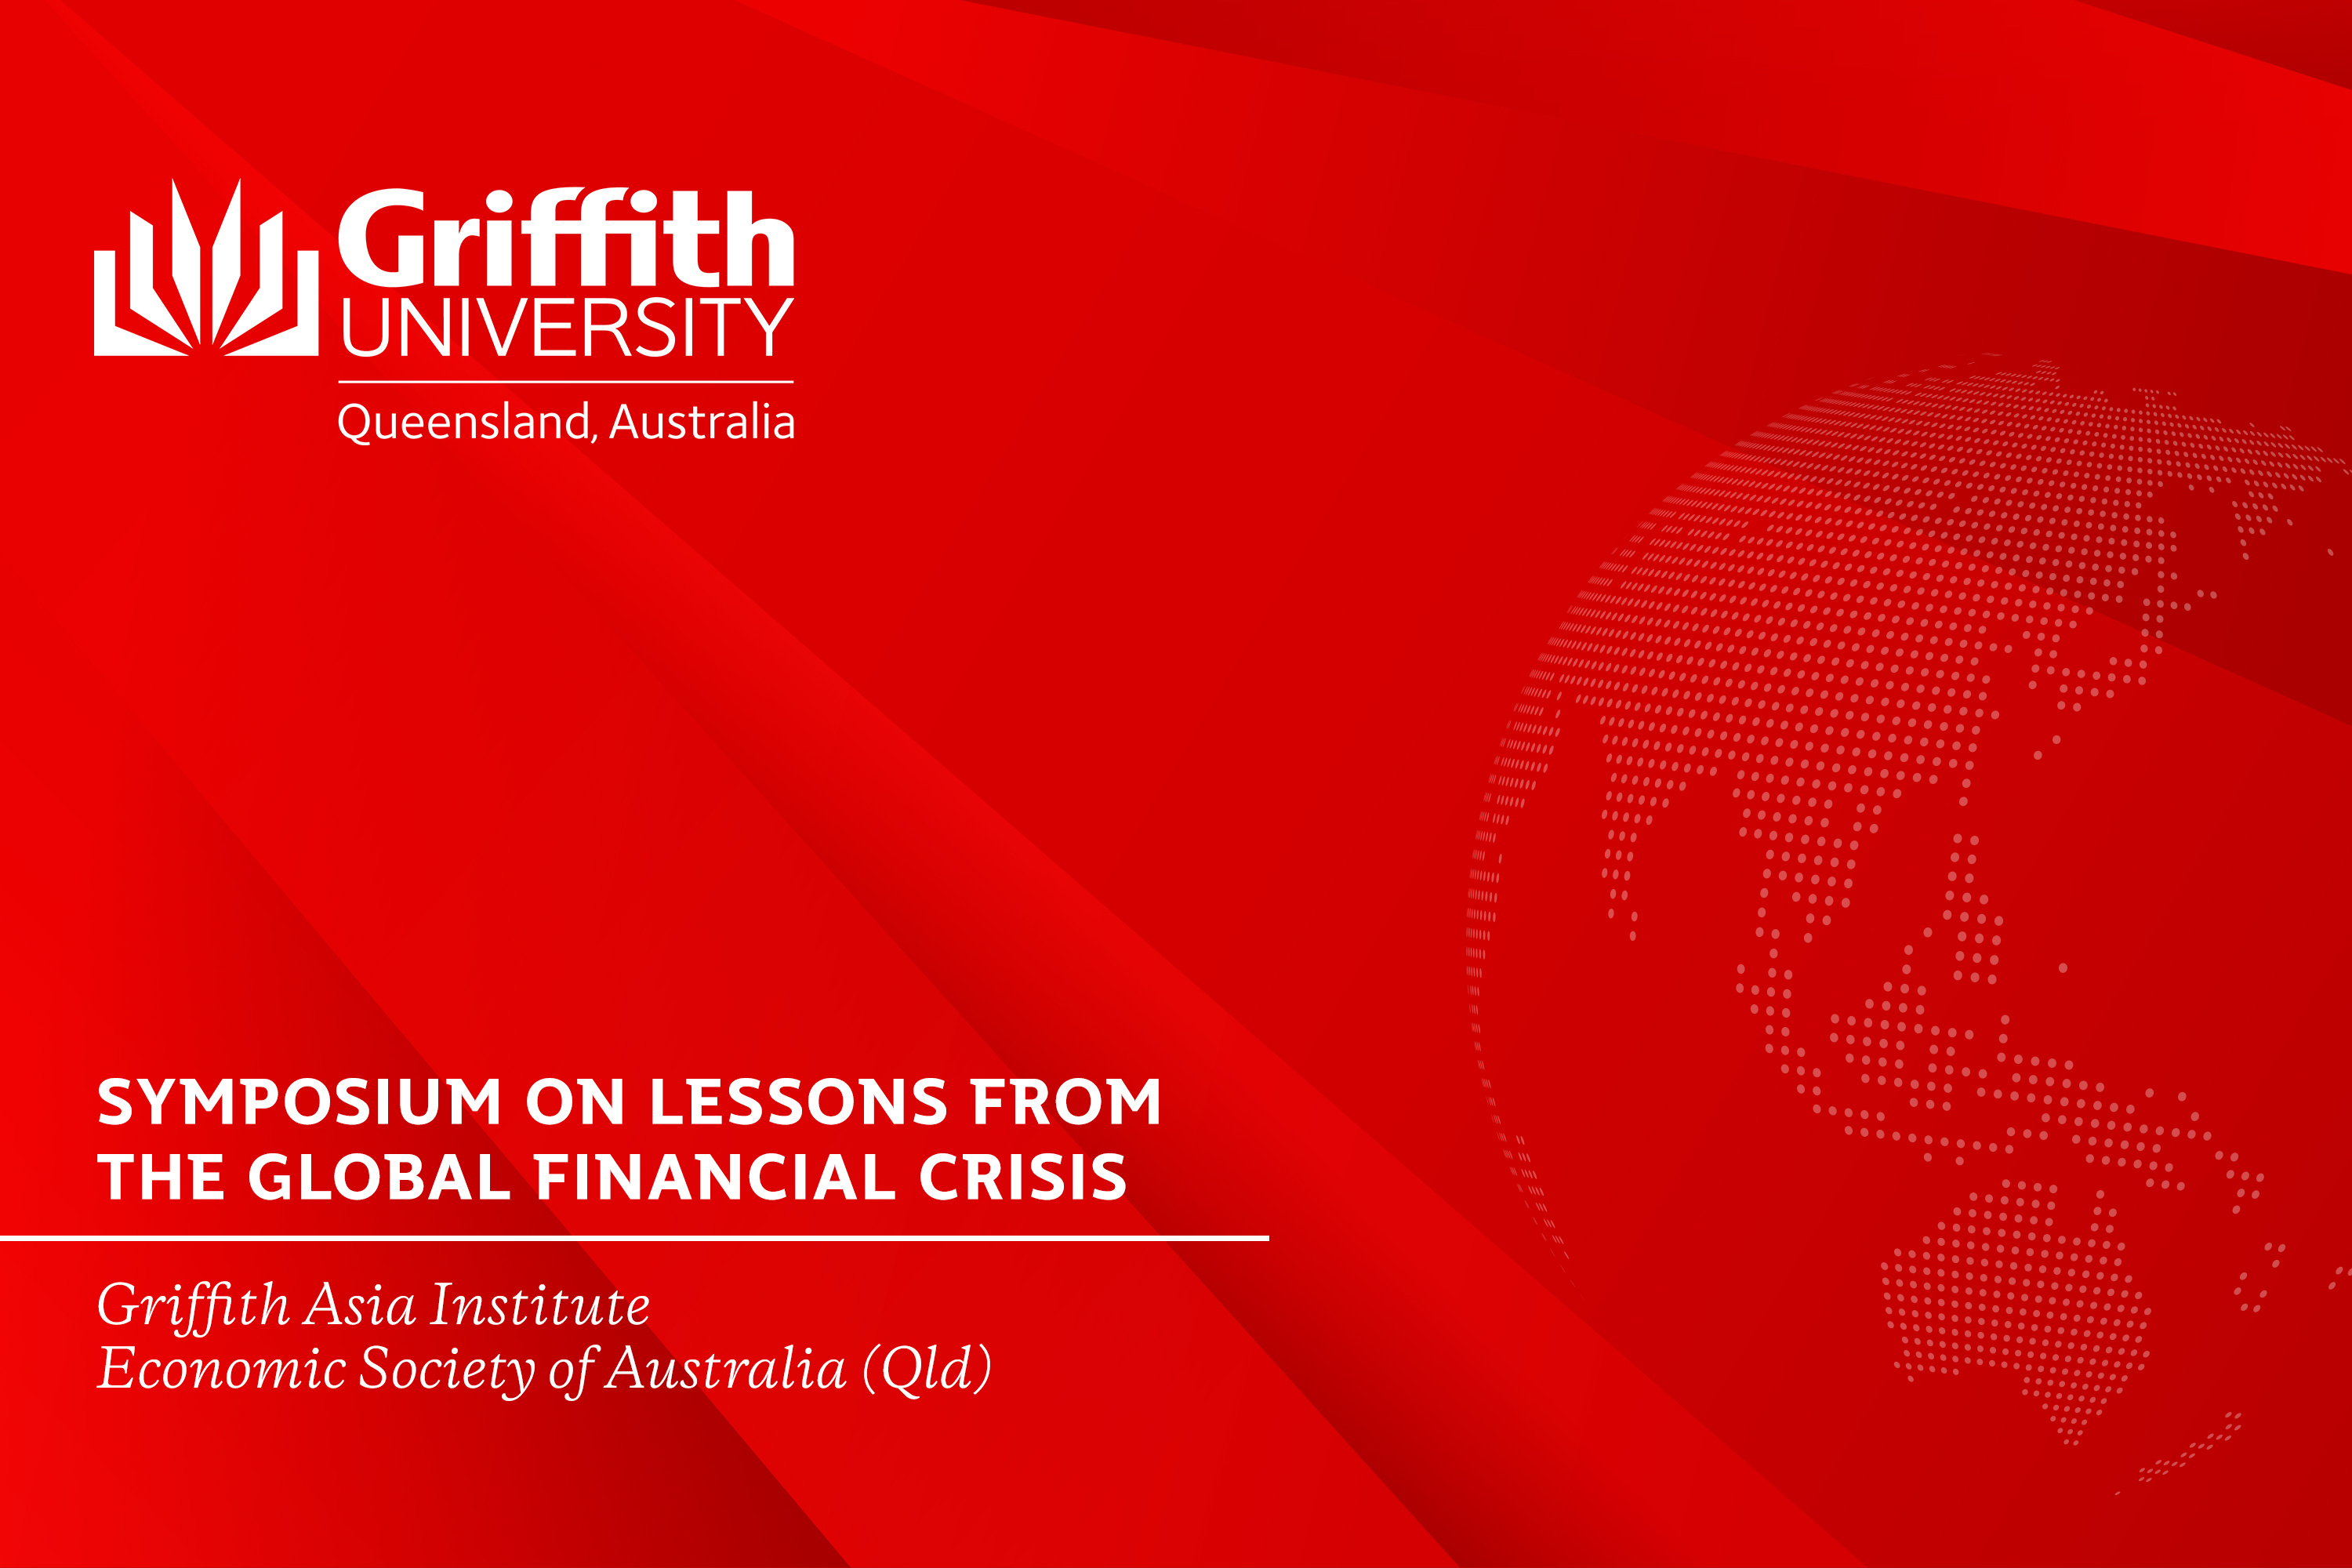 Symposium on Lessons from the Global Financial Crisis